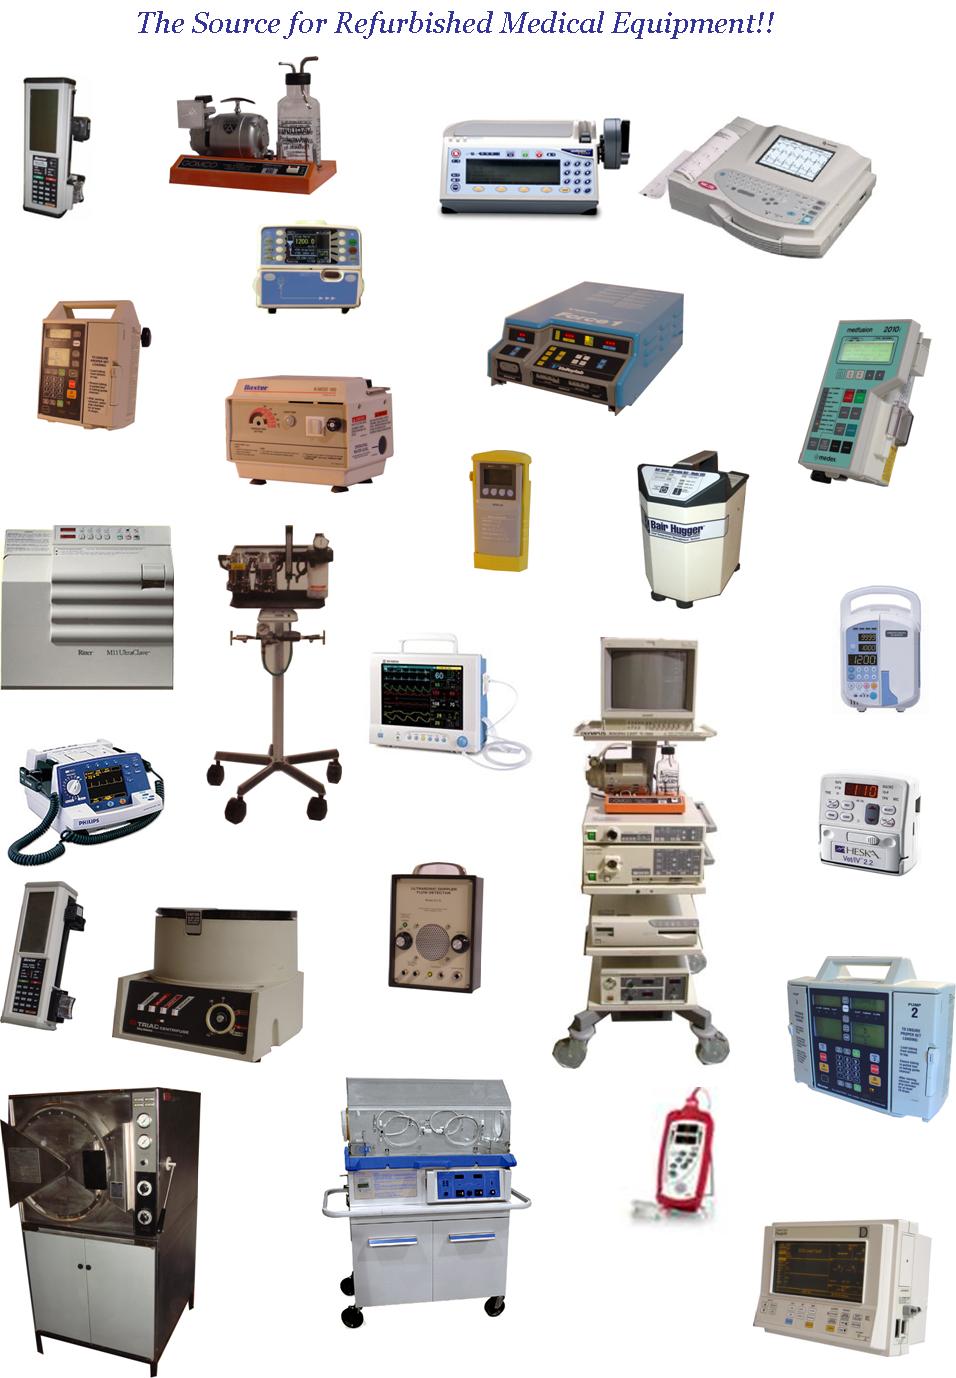 The source for refurbished medical equipment.